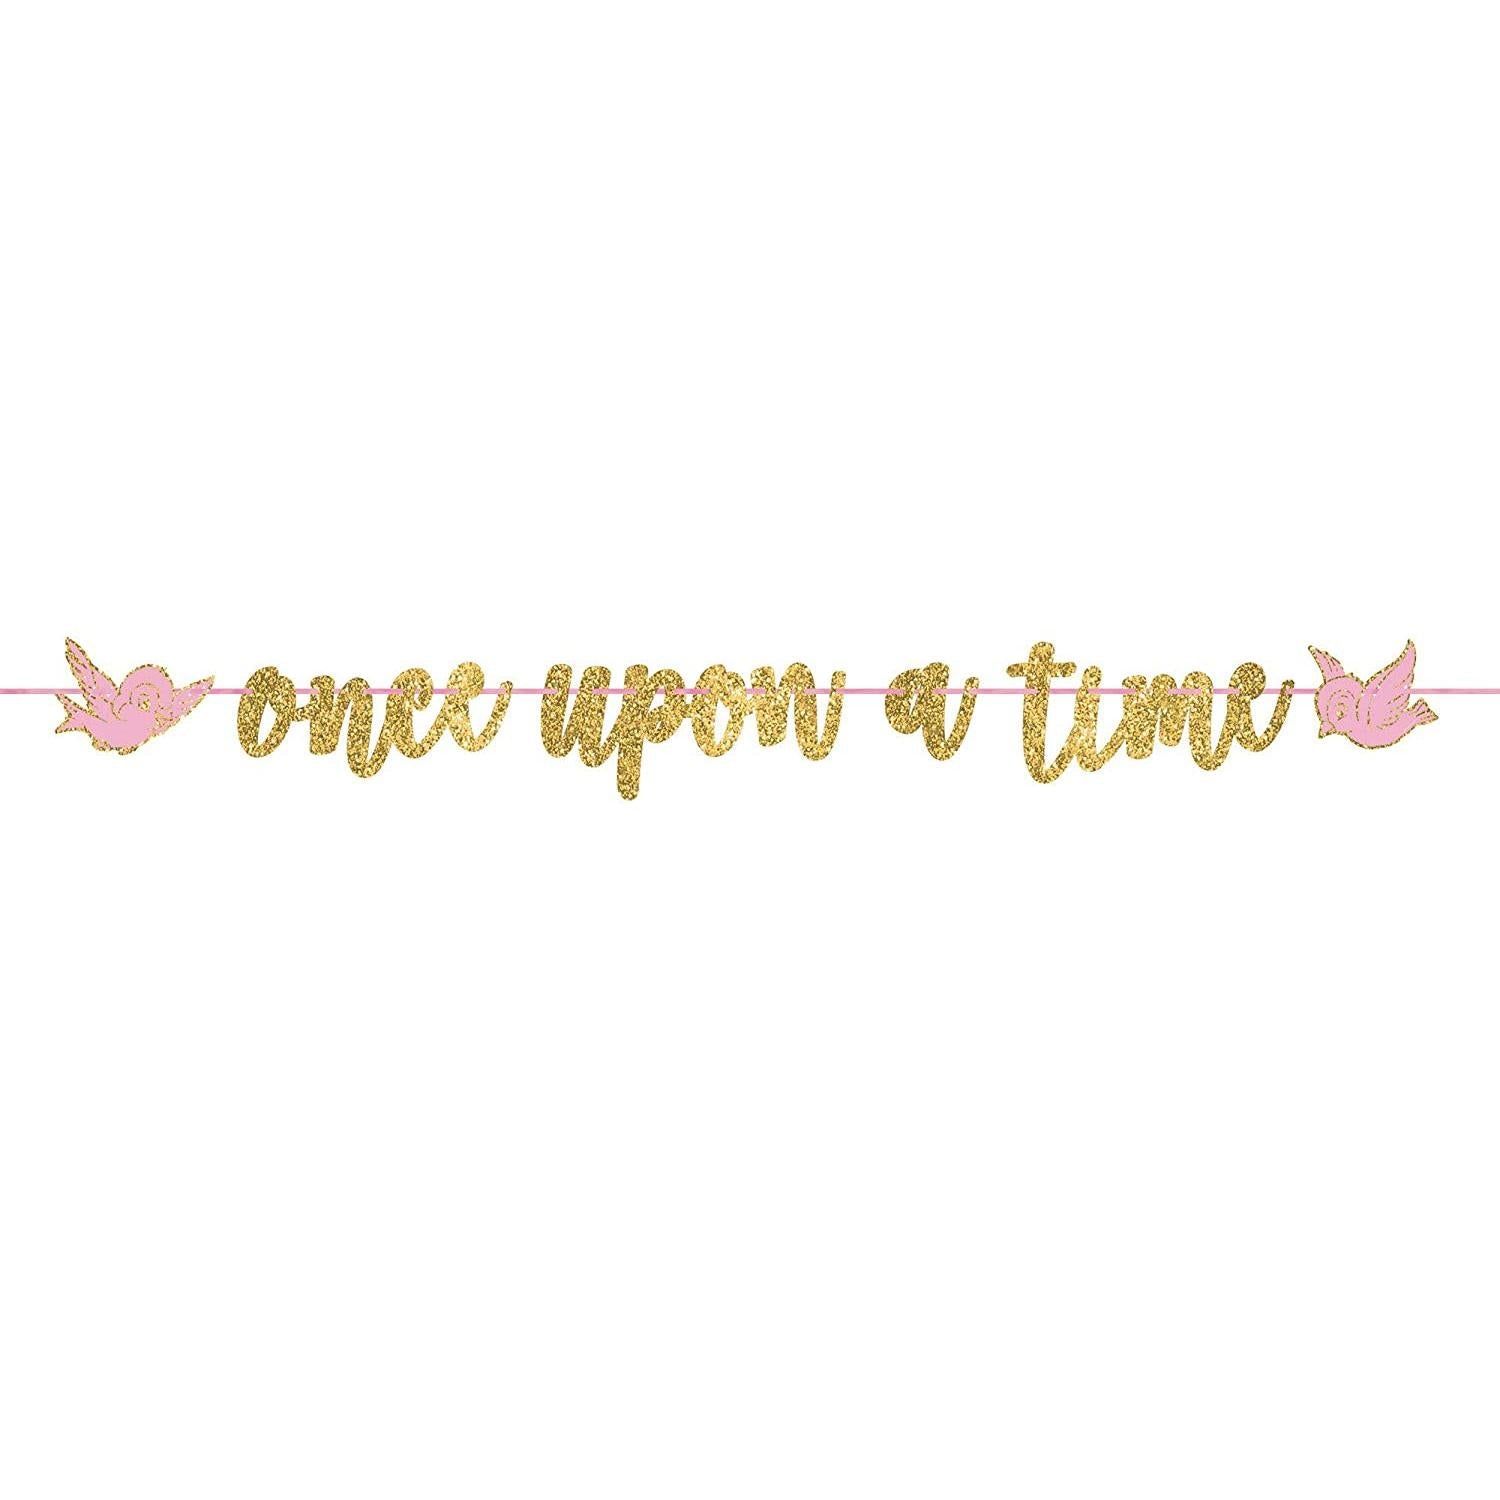 Once Upon A Time Ribbon Banner with Glitter Paper Letters Decorations - Party Centre